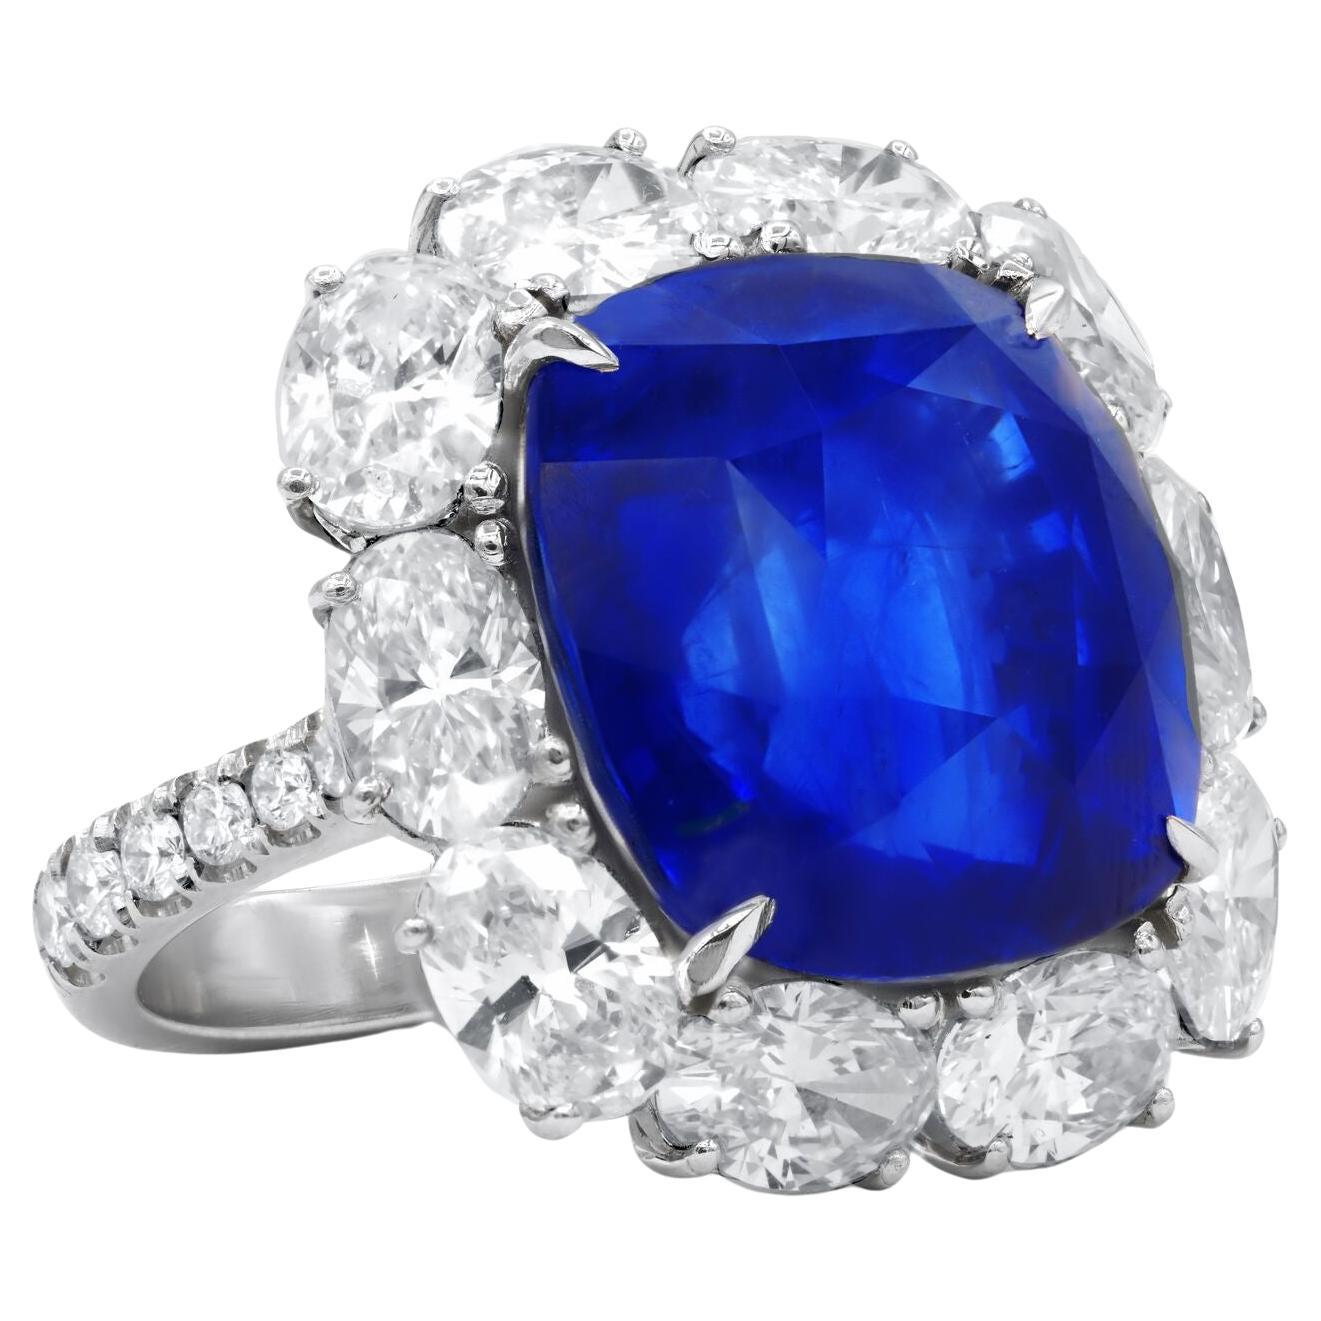 Diana M. Platinum sapphire and diamond ring GRS certified 24.38ct sapphire  For Sale